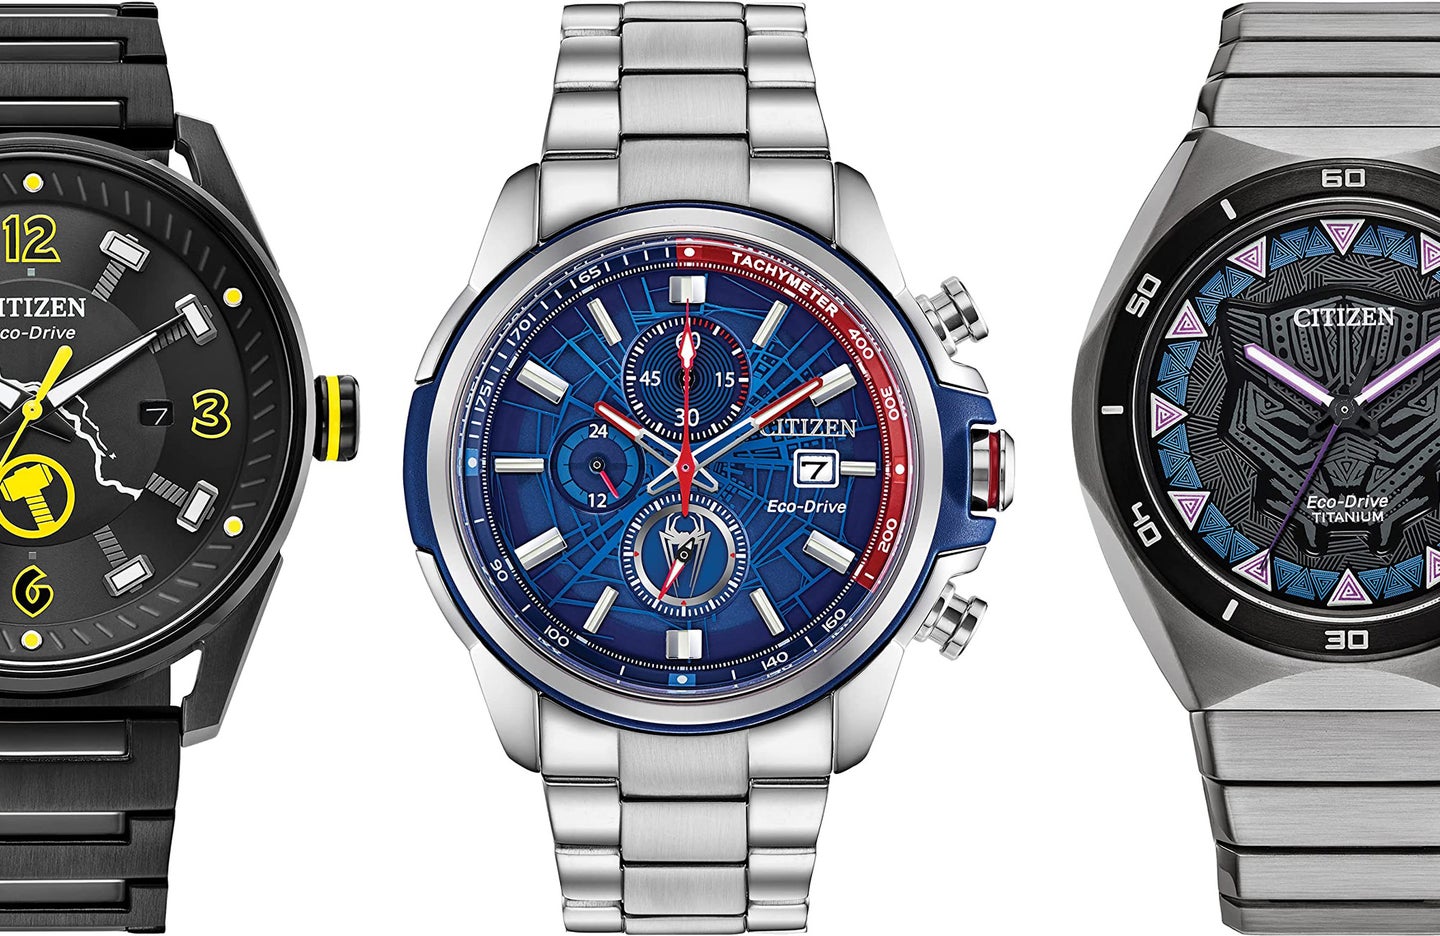 Citizen Marvel-themed watches that are on-sale at Amazon. From left to right: Thor watch, Spider Man watch, Black Panther watch.